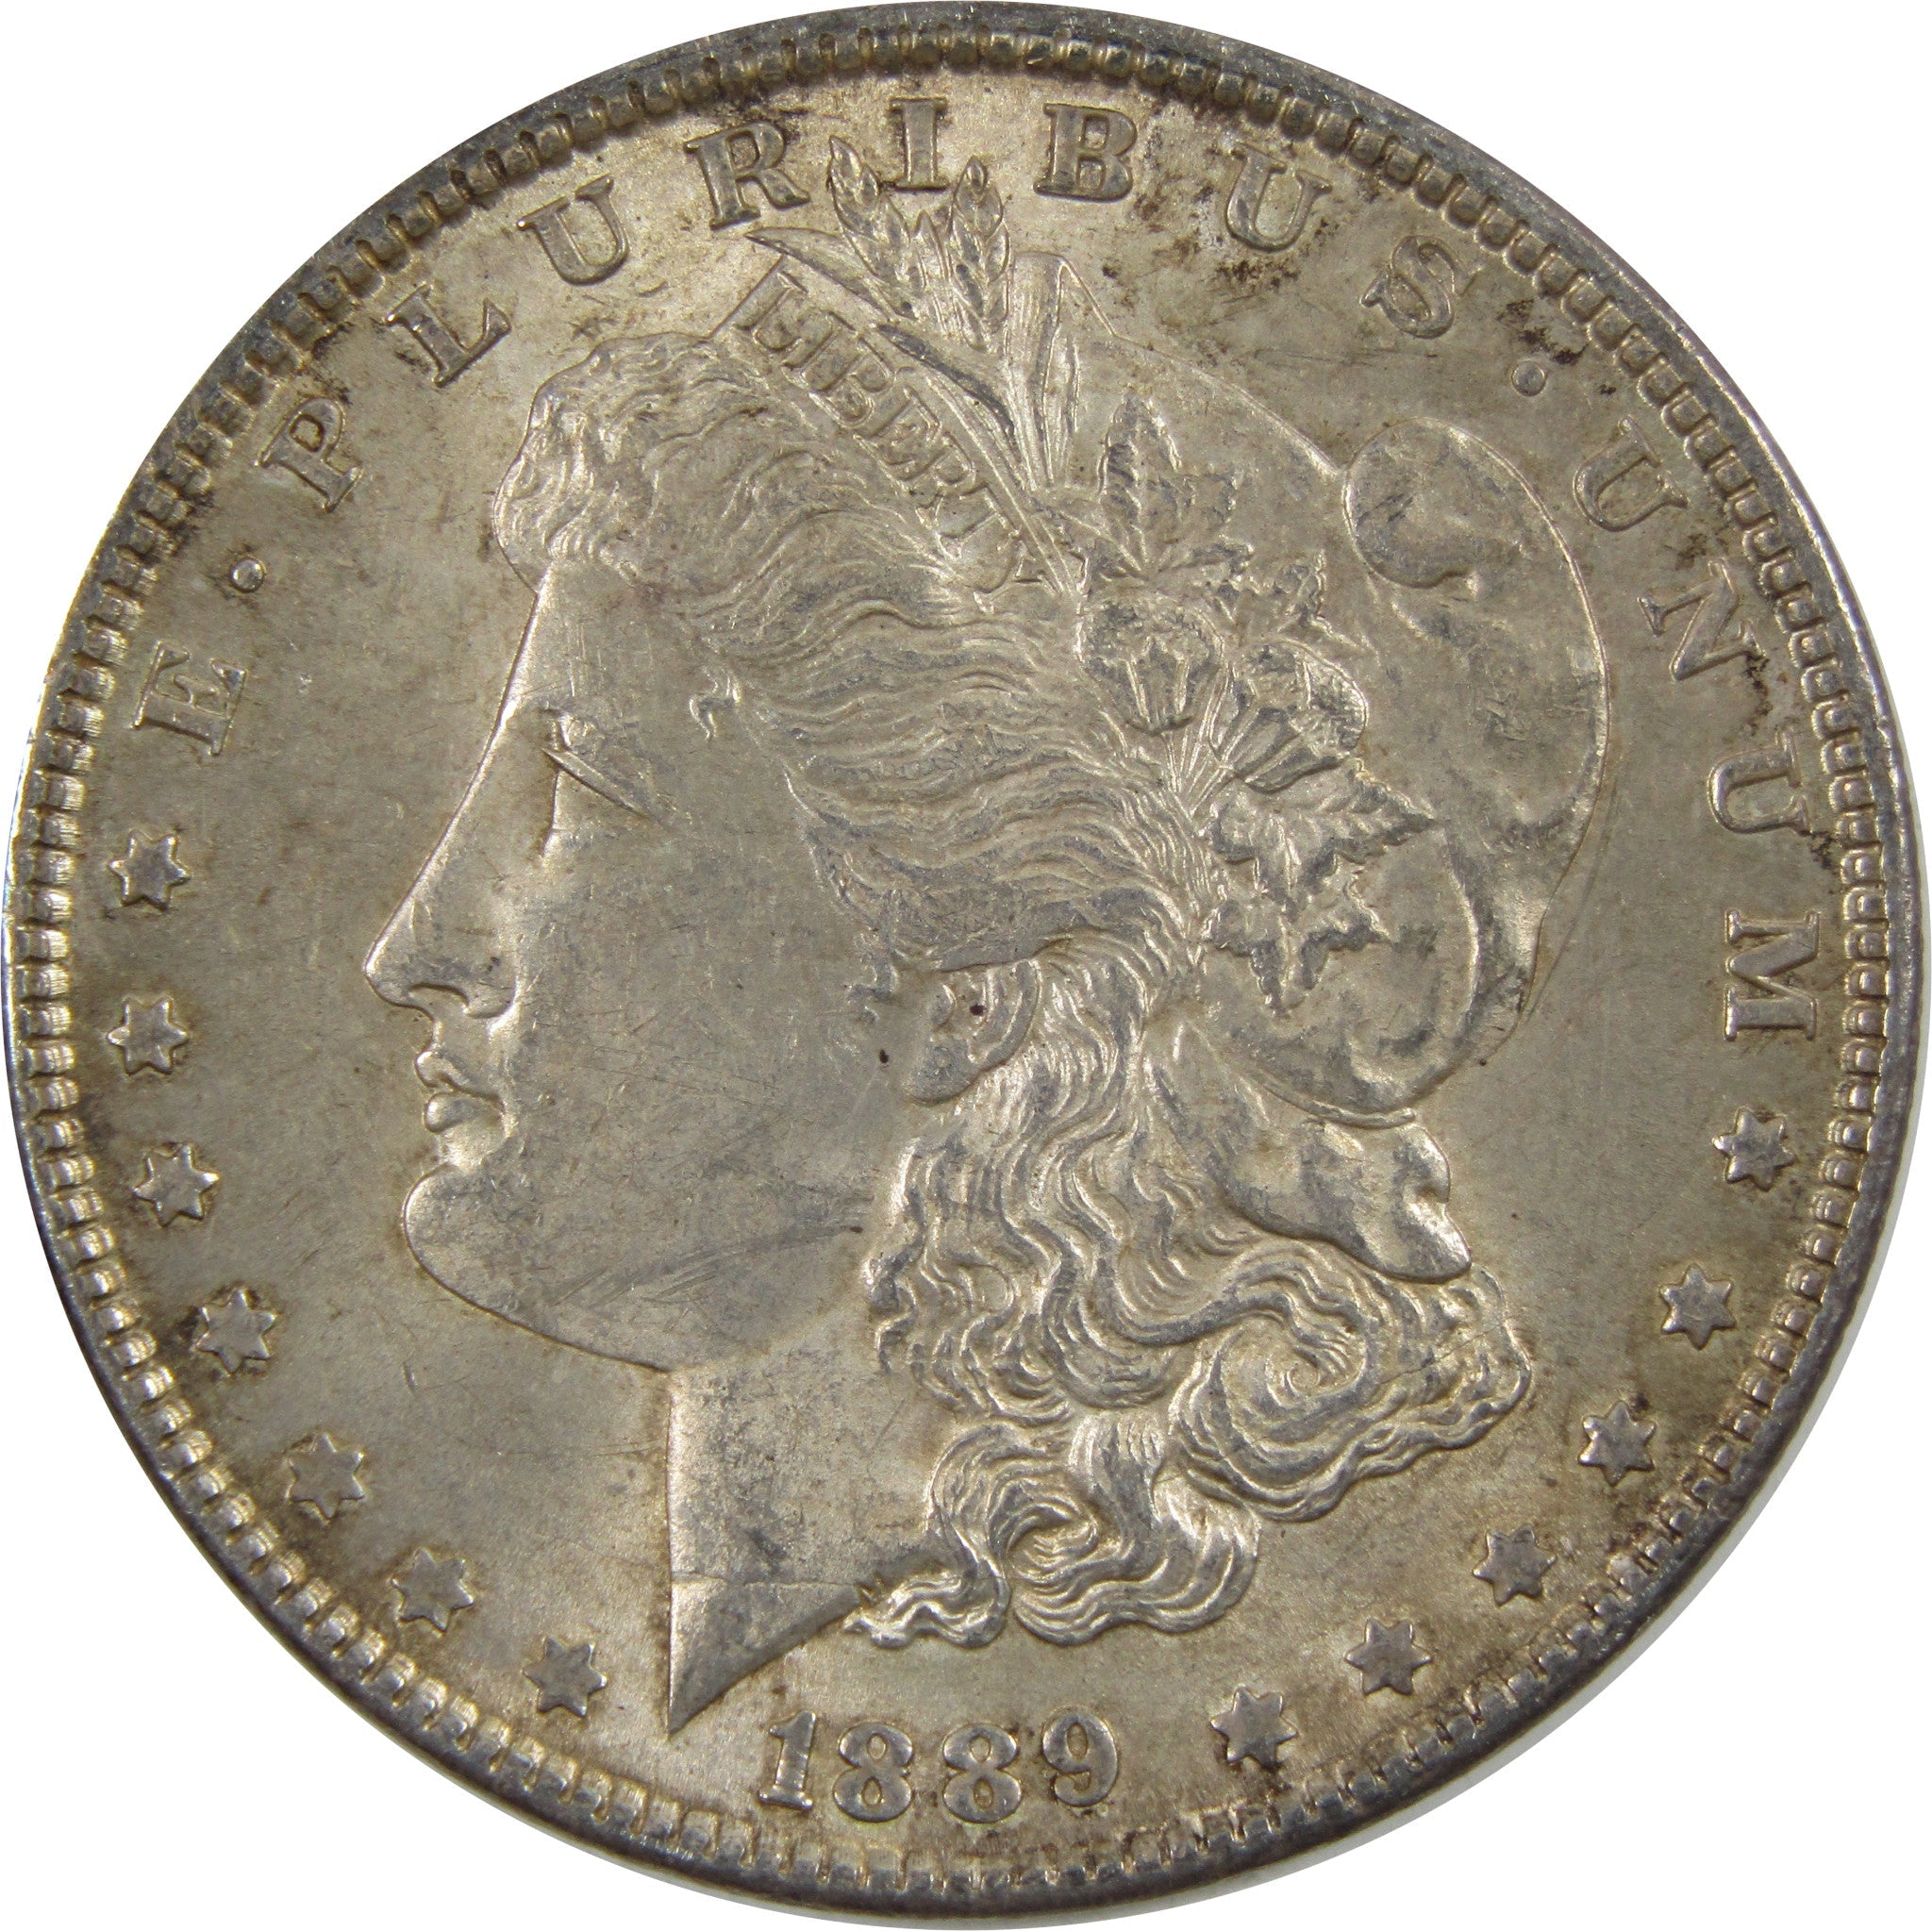 1889 Morgan Dollar AU About Uncirculated 90% Silver $1 Coin SKU:I5456 - Morgan coin - Morgan silver dollar - Morgan silver dollar for sale - Profile Coins &amp; Collectibles